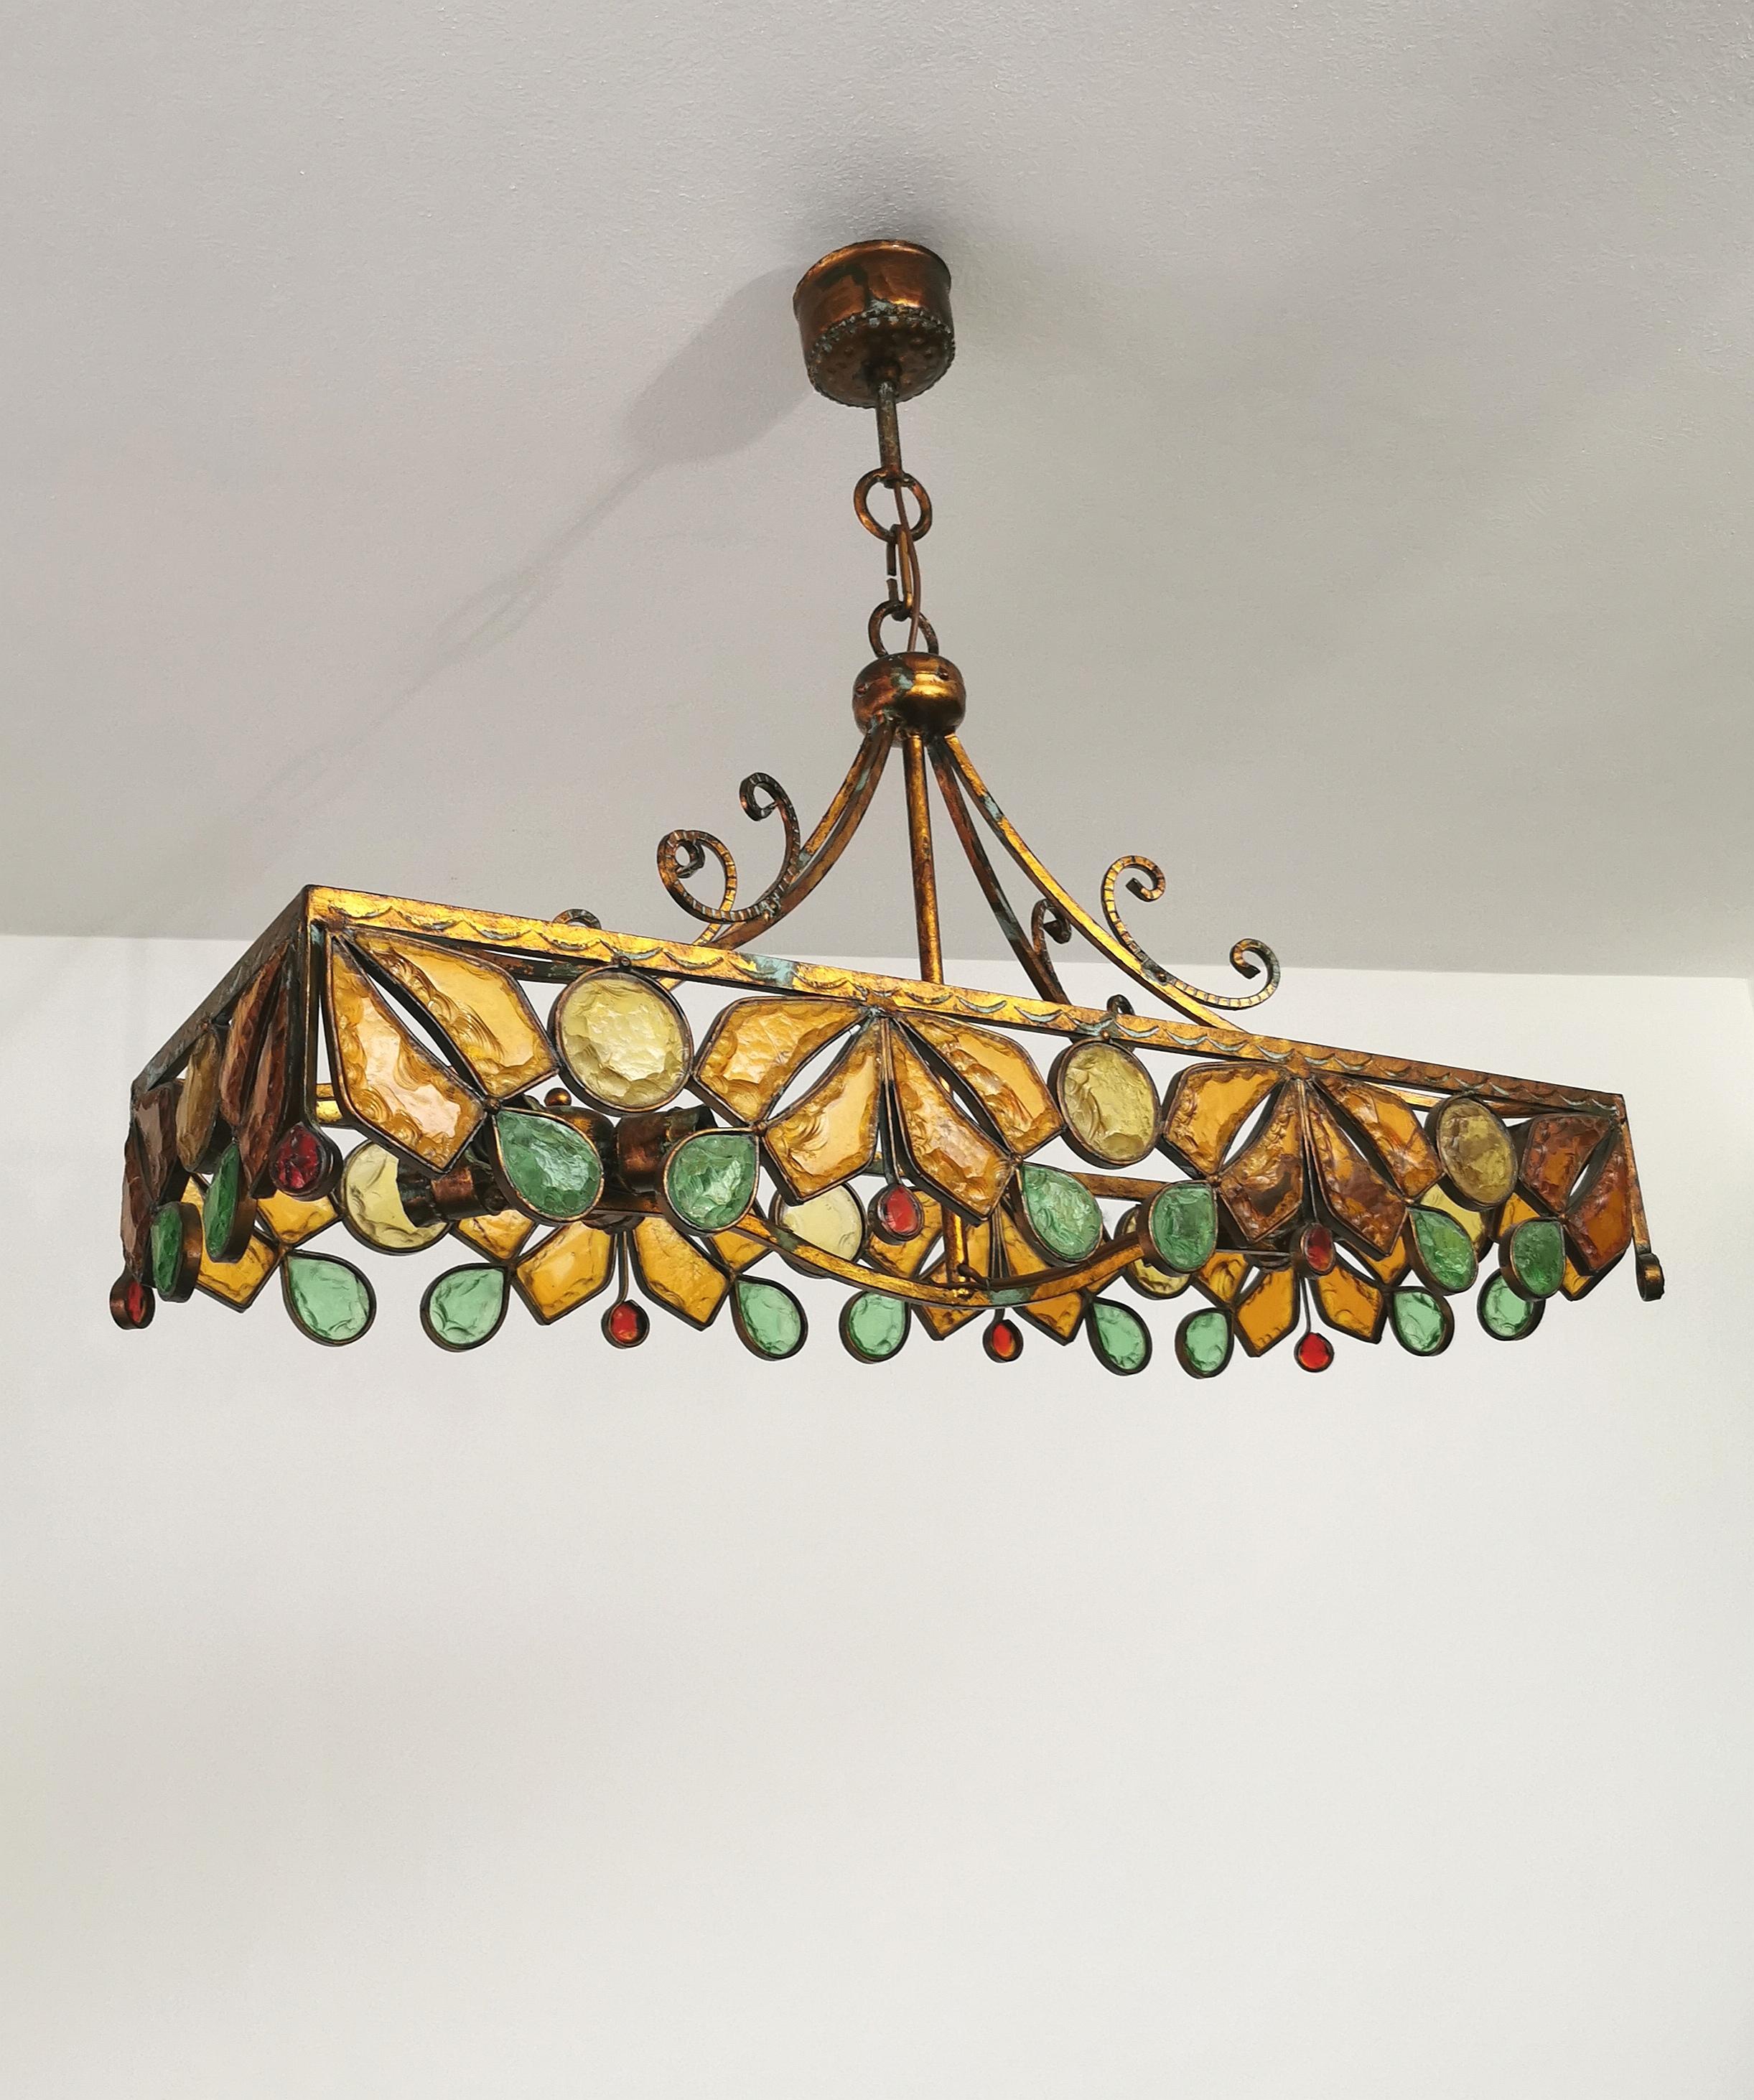 Large 8-light chandelier produced in Italy in the 1970s by Poliarte. The chandelier was made of bronzed metal decorated with thick hammered glass in shades of yellow, green, red and transparent.


Note: We try to offer our customers an excellent